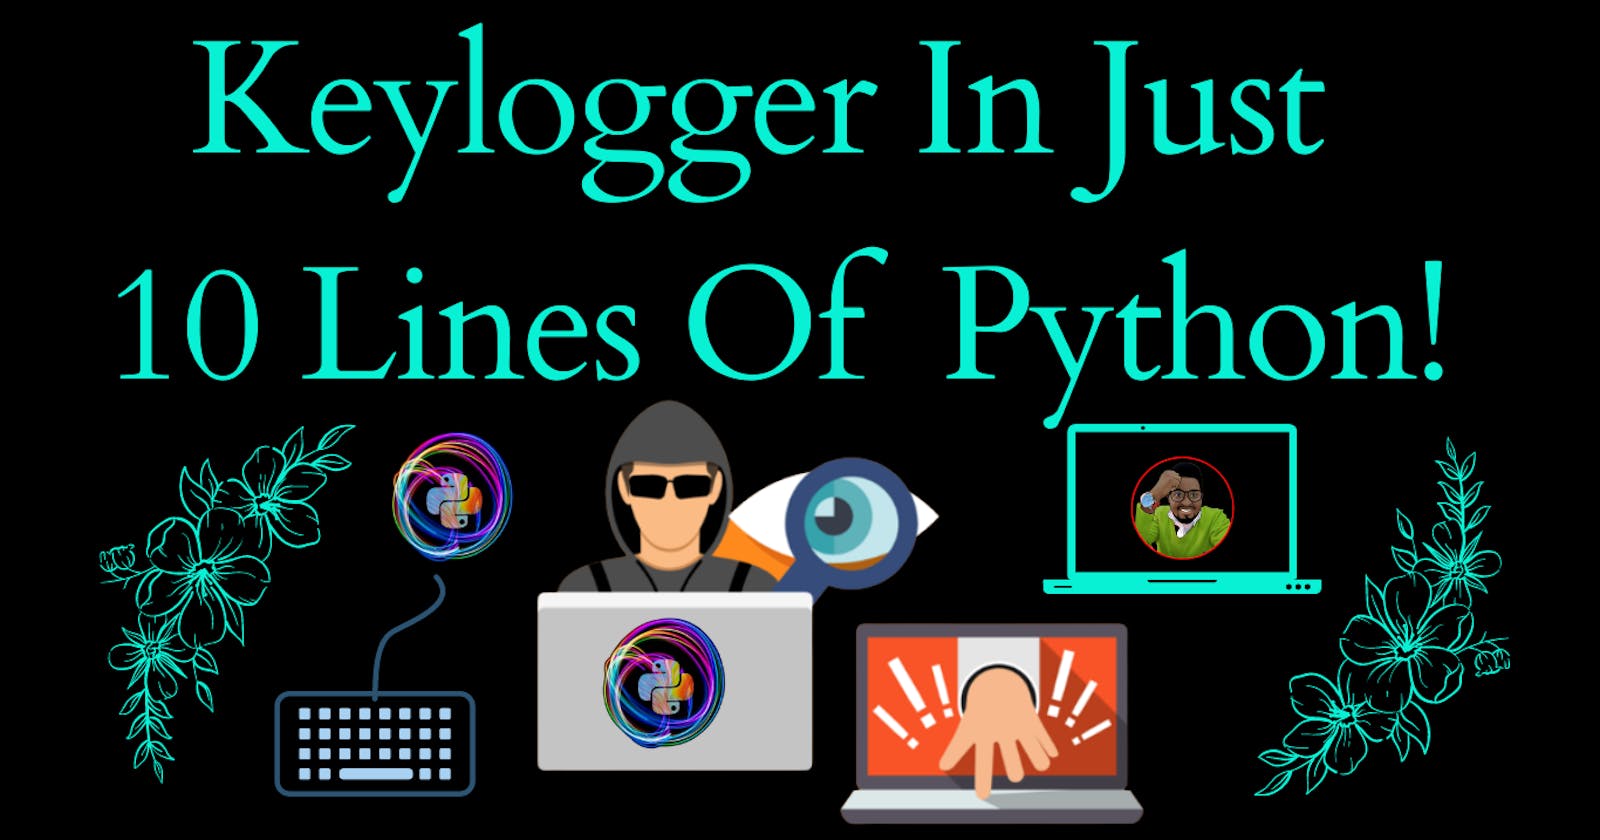 Keylogger In Just 10 Lines Of Python